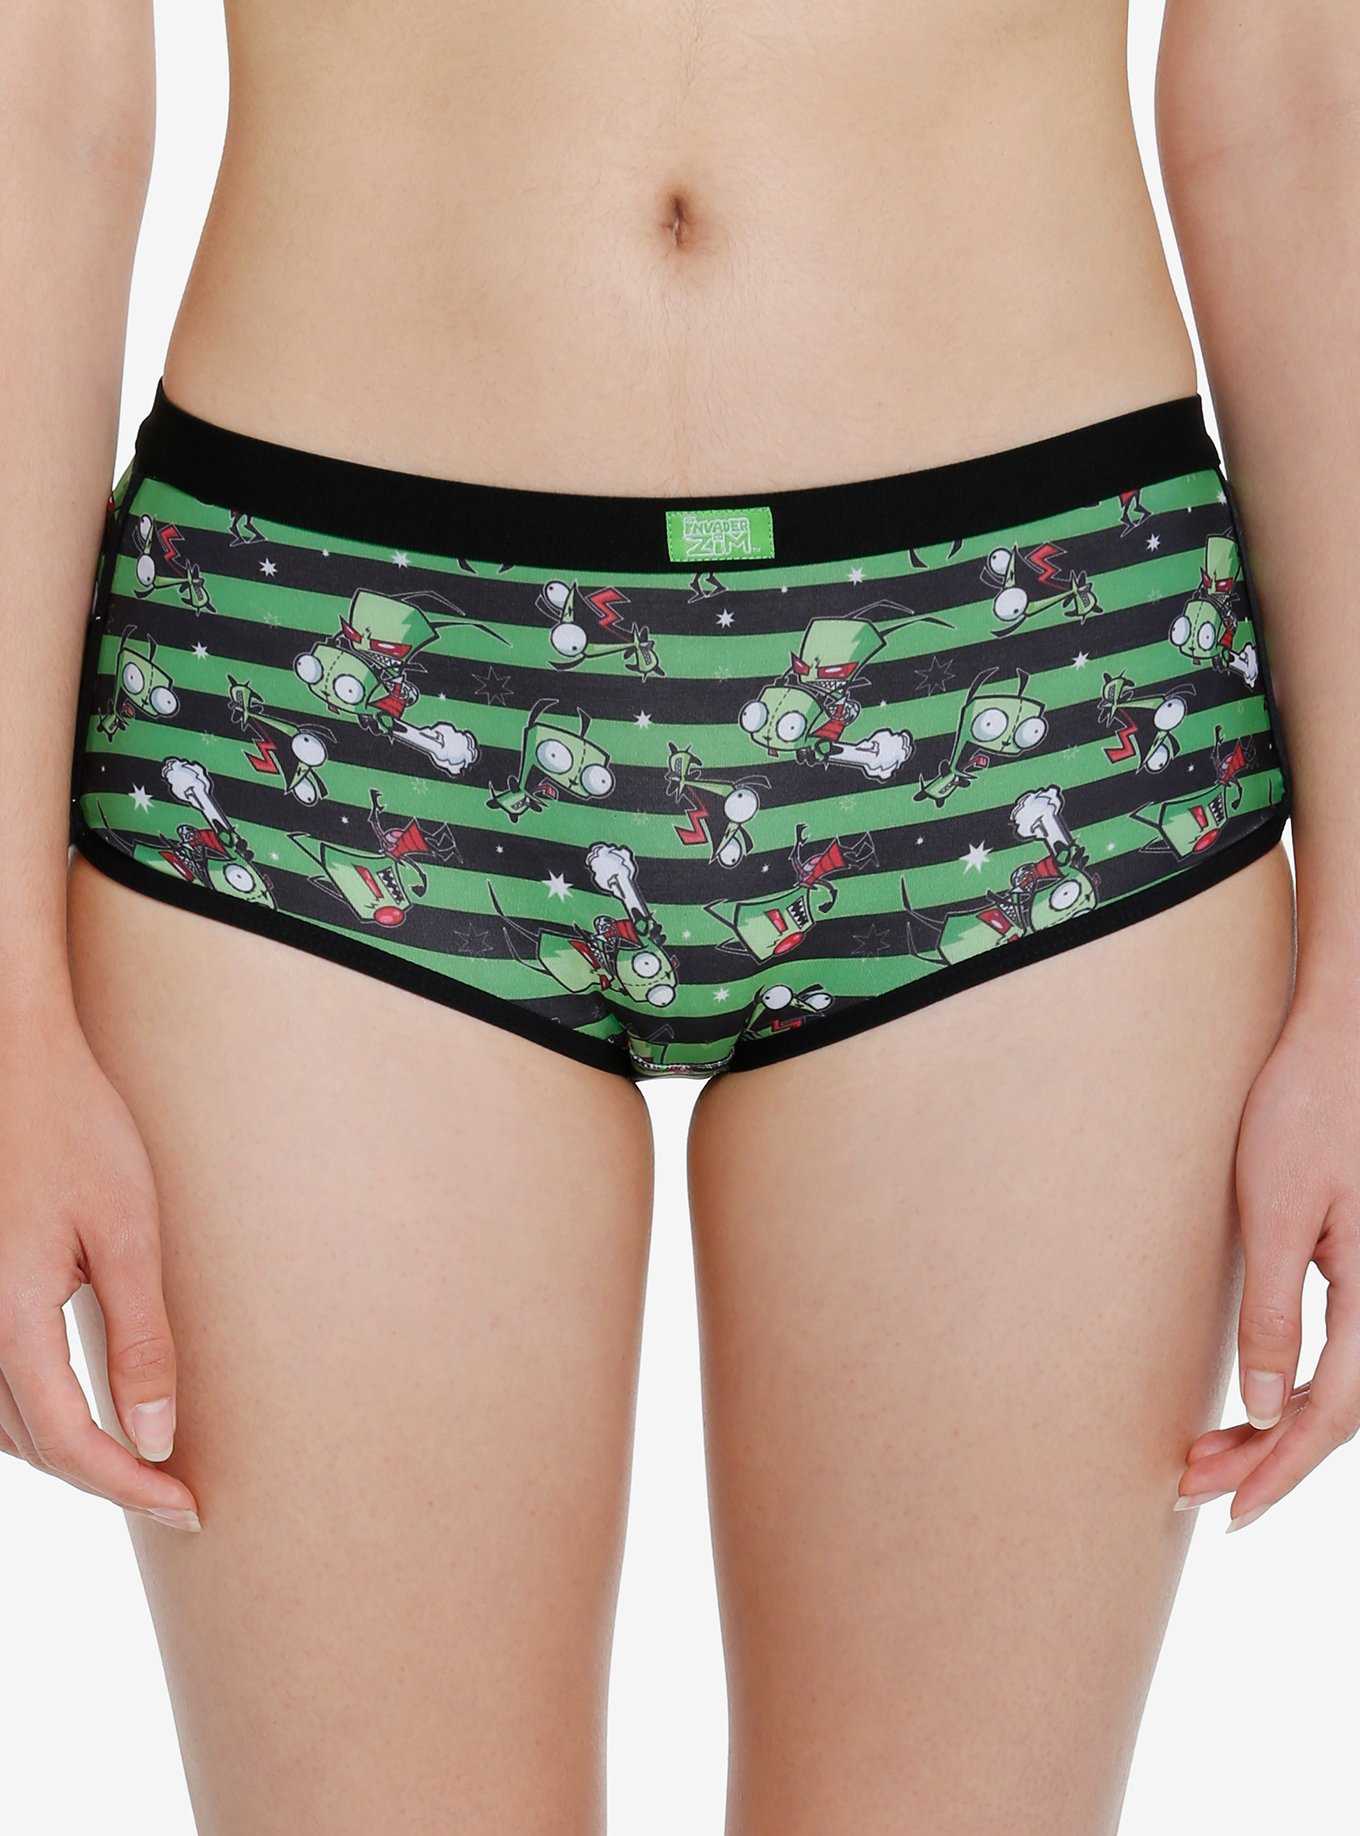 Wholesale adult disney panties In Sexy And Comfortable Styles